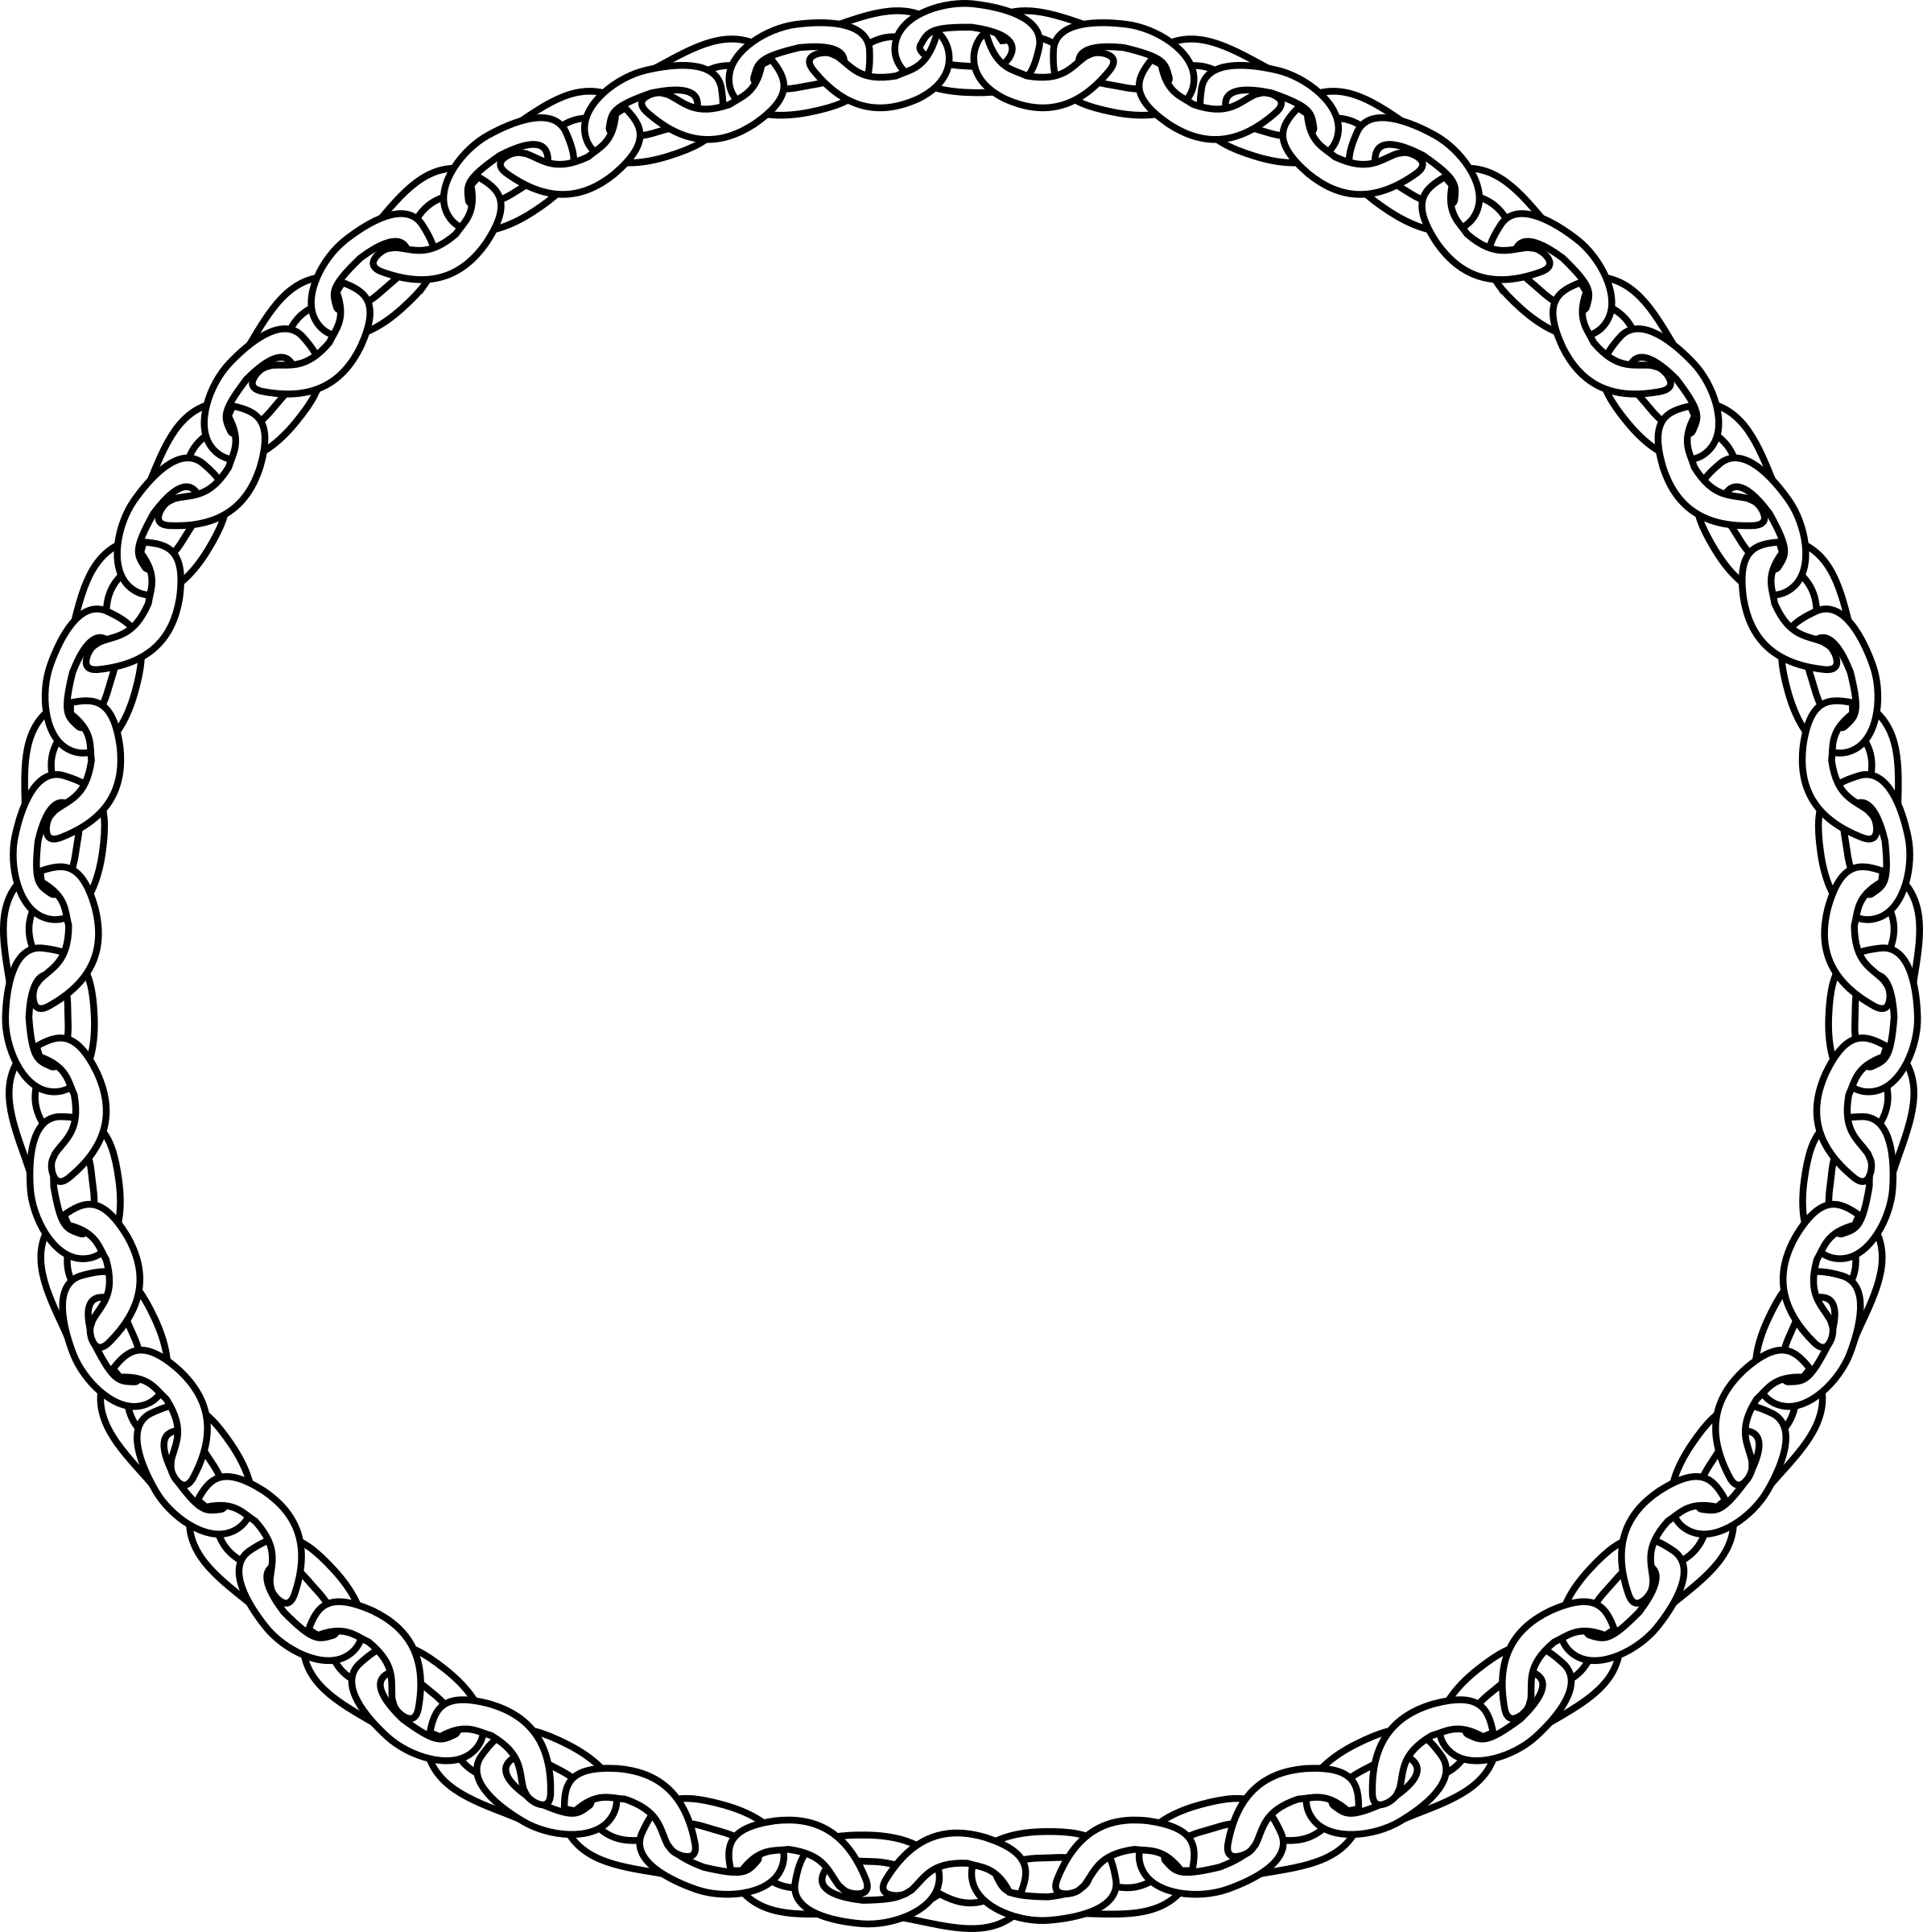 Free Chain Circle Png, Download Free Chain Circle Png png images, Free